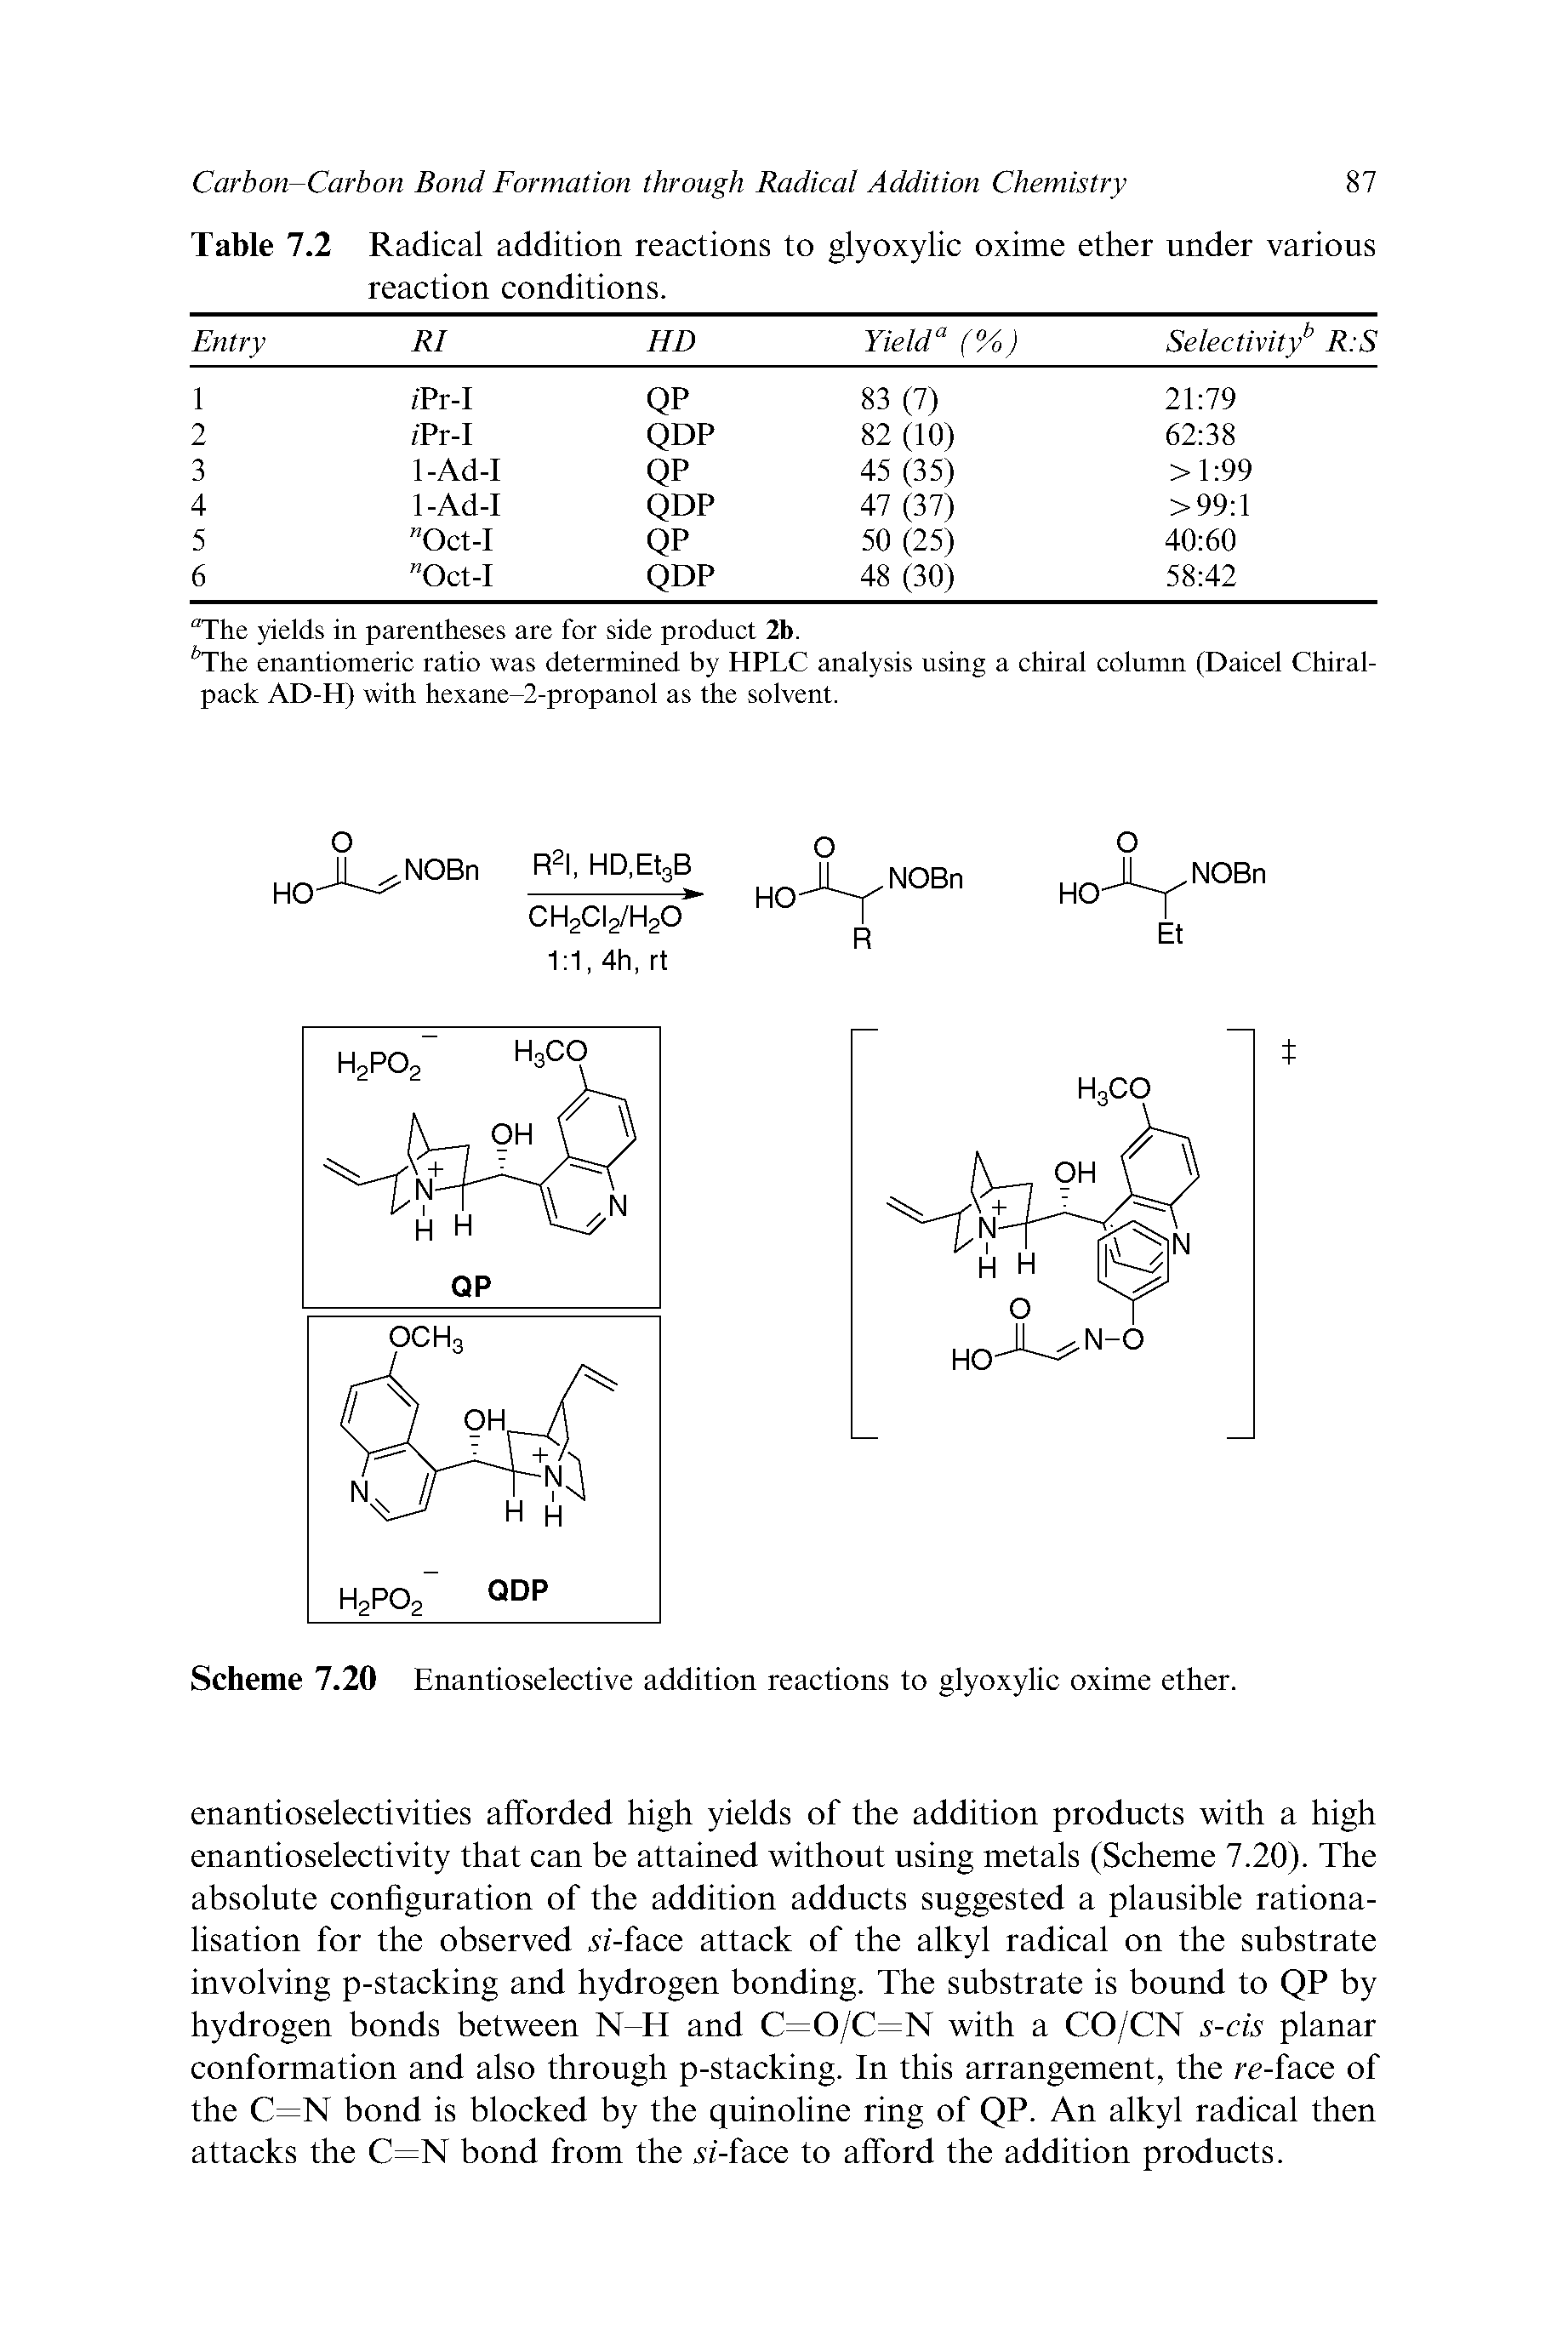 Scheme 7.20 Enantioselective addition reactions to glyoxylic oxime ether.